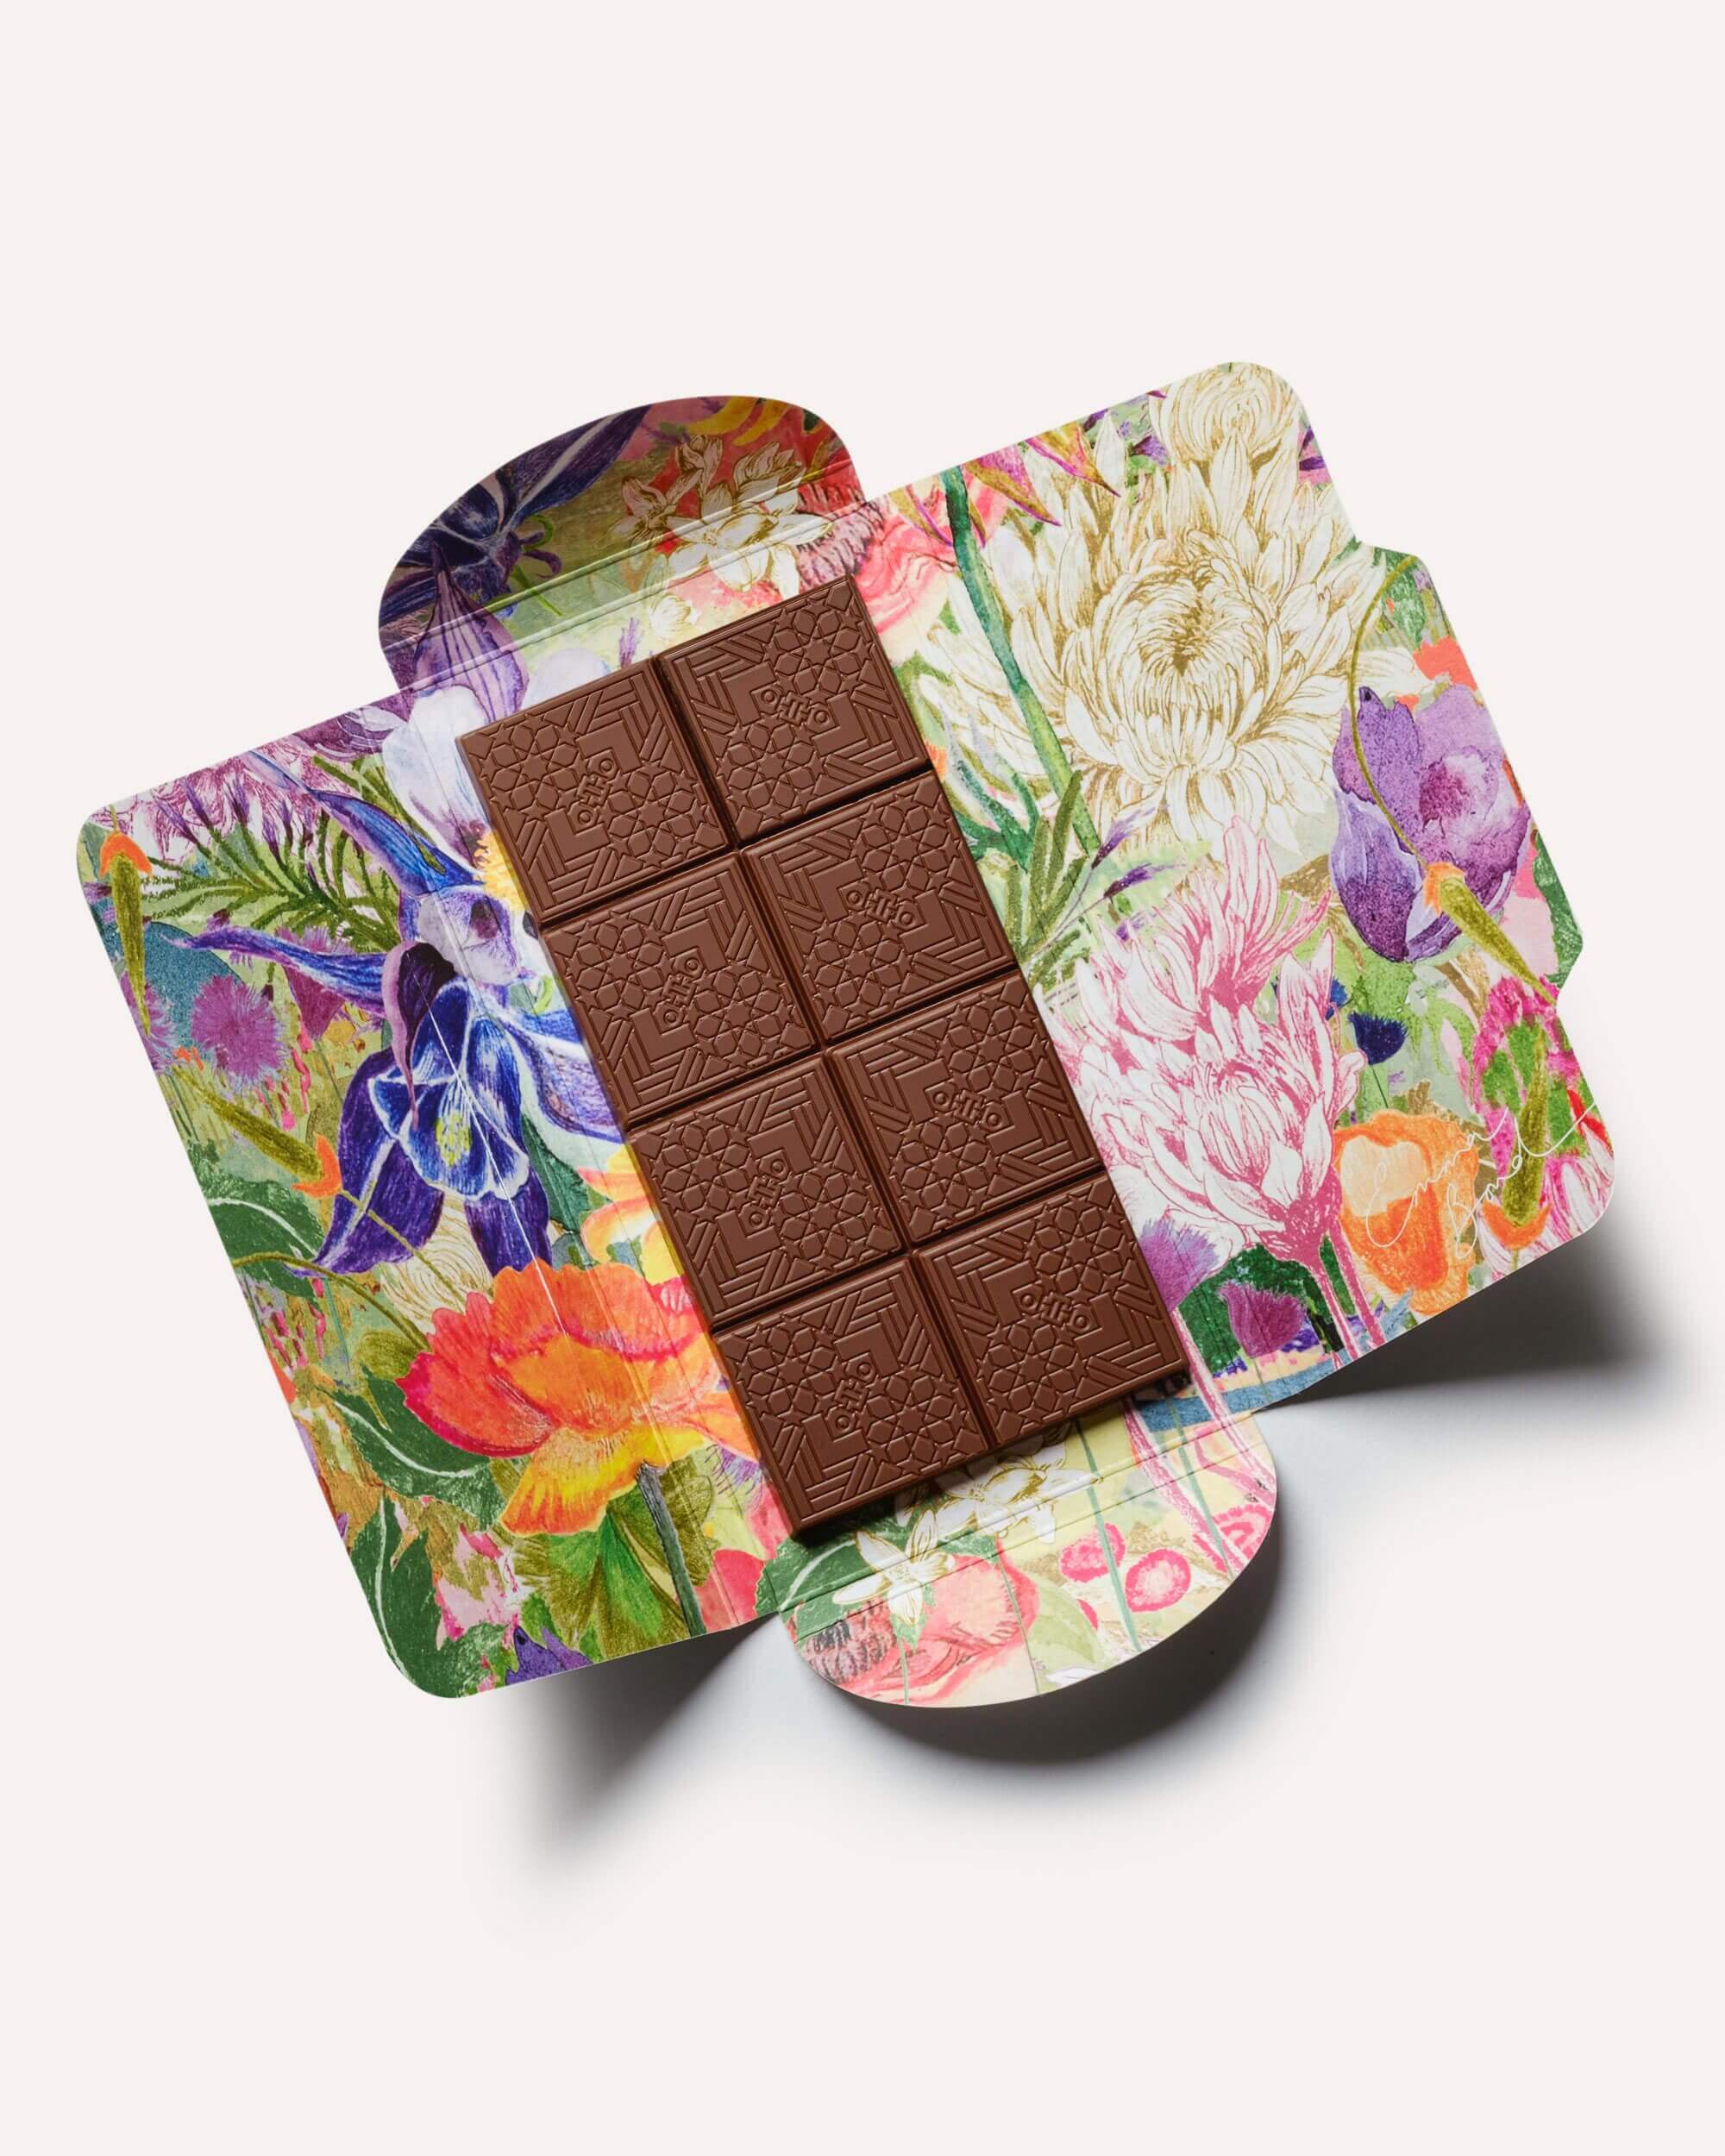 CBNight Milk Chocolate floral packaging open